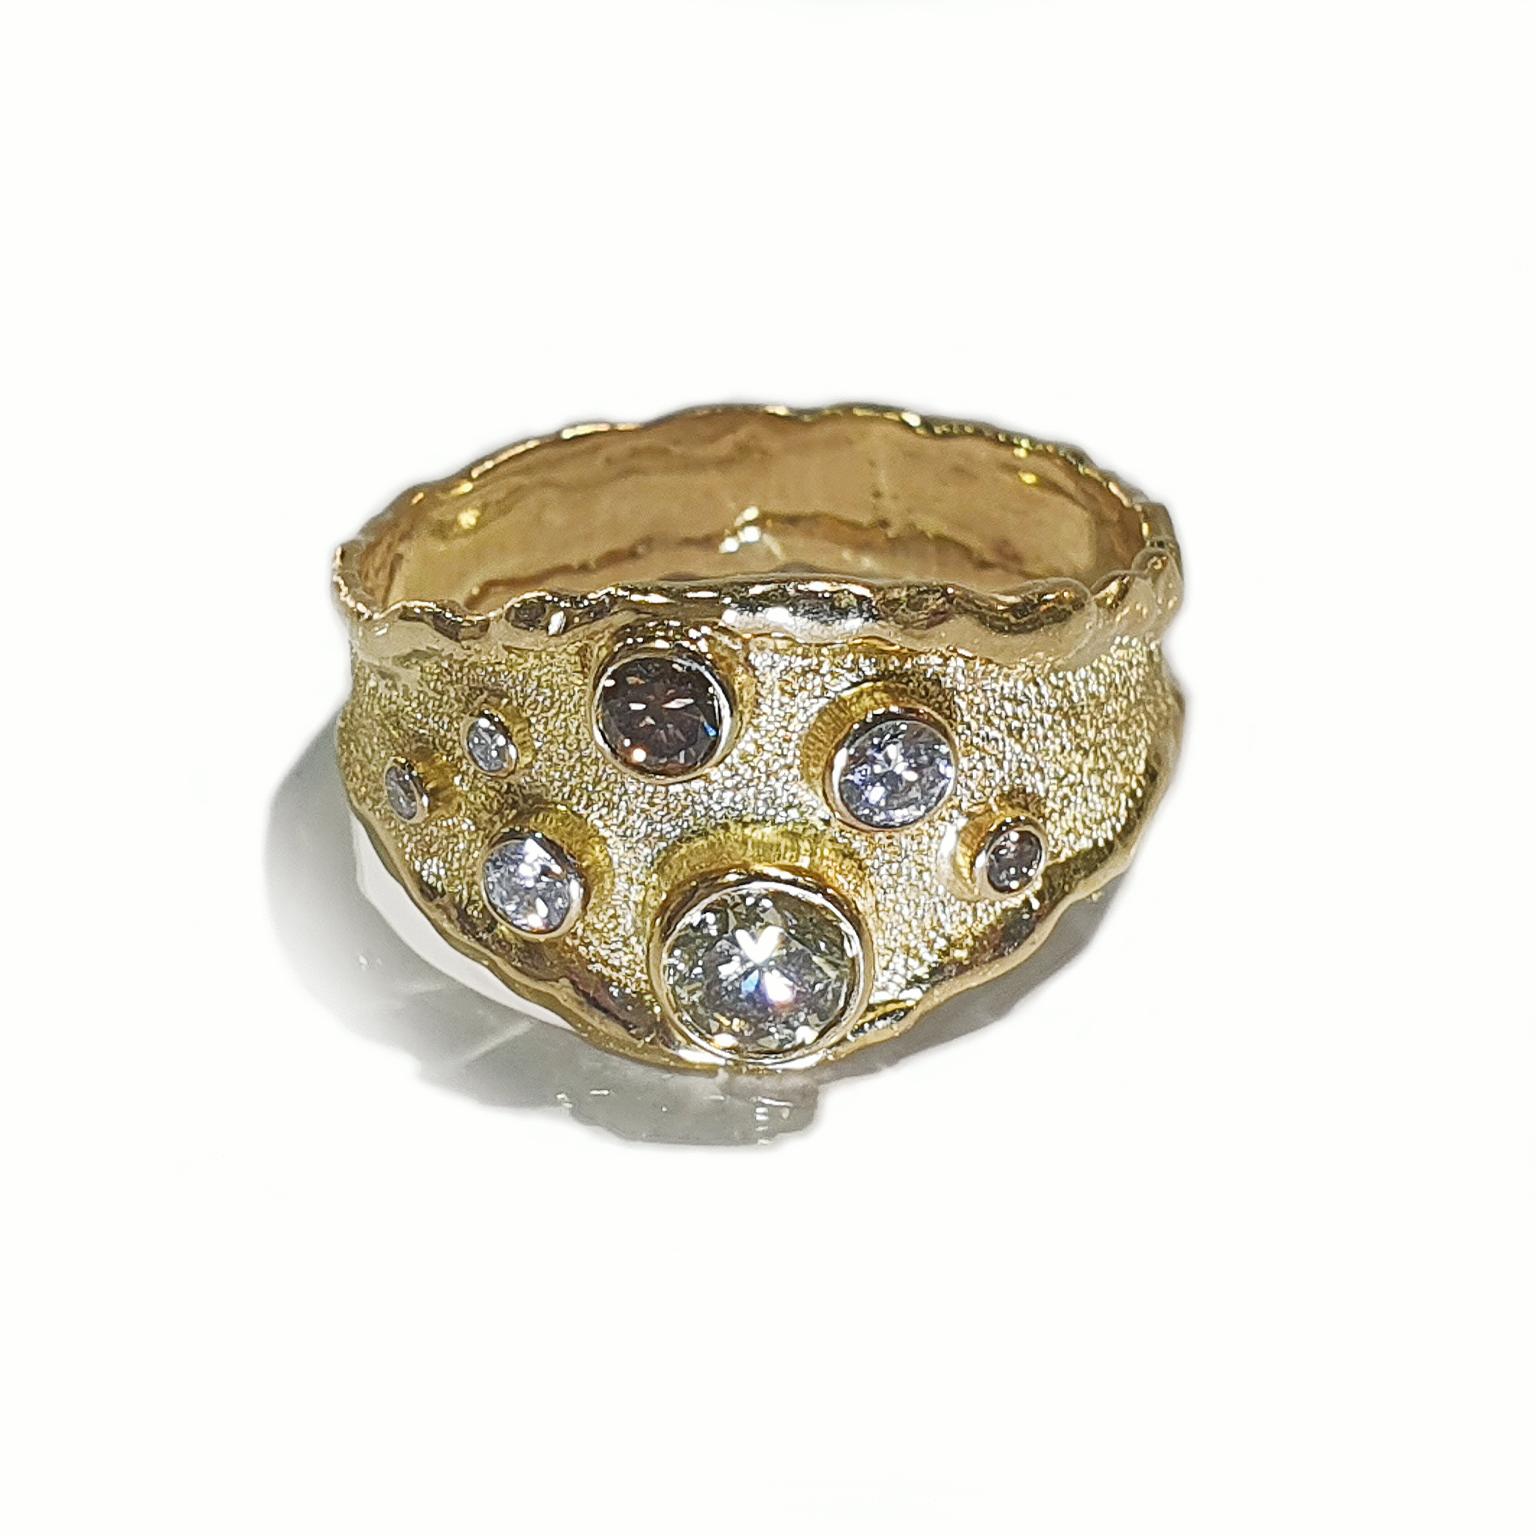 Paul Amey’s signature molten edge Argyle type diamond ring was crafted from 18K yellow gold. This molten edge ring features three Argyle type diamonds, a 35pt C5, an 8pt C6 and a 3pt C6. The ring also displays a 15pt, an 8pt, a 5pt and two 1pt round